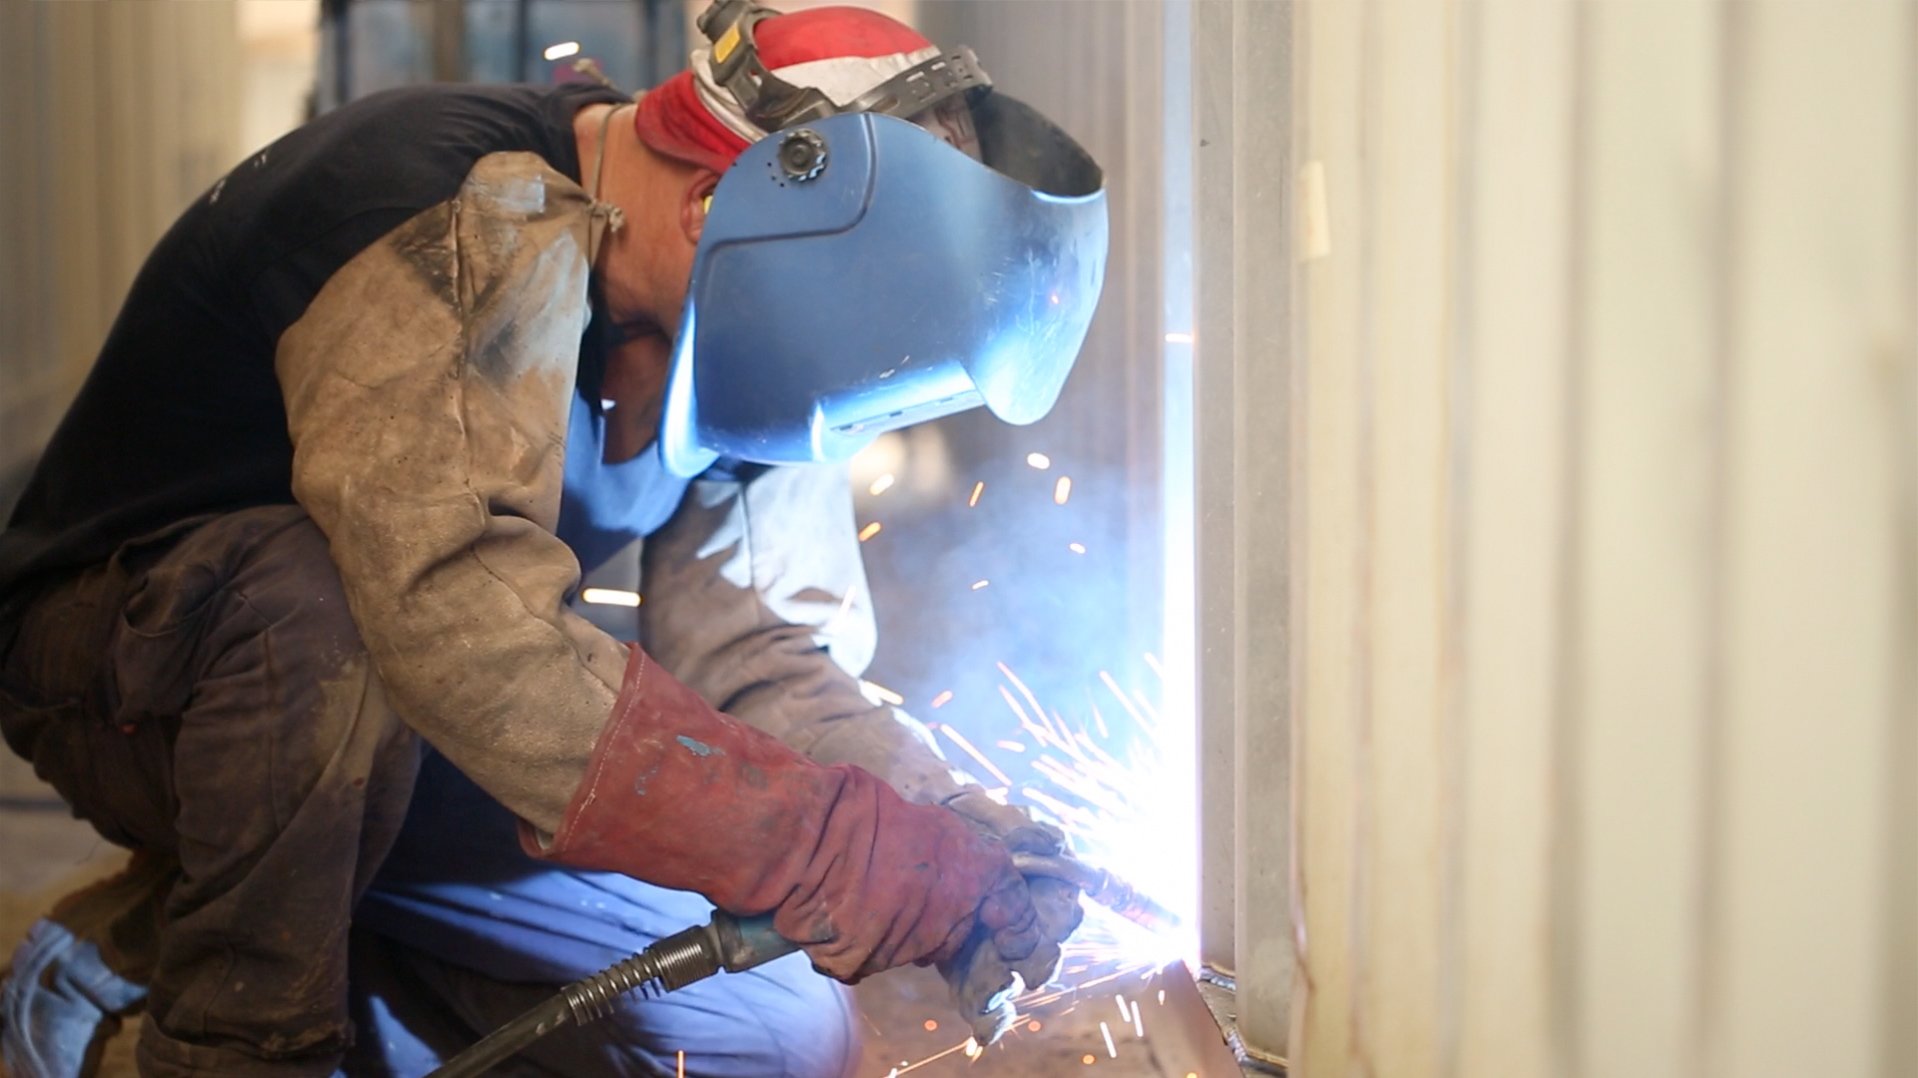 Man welding a container